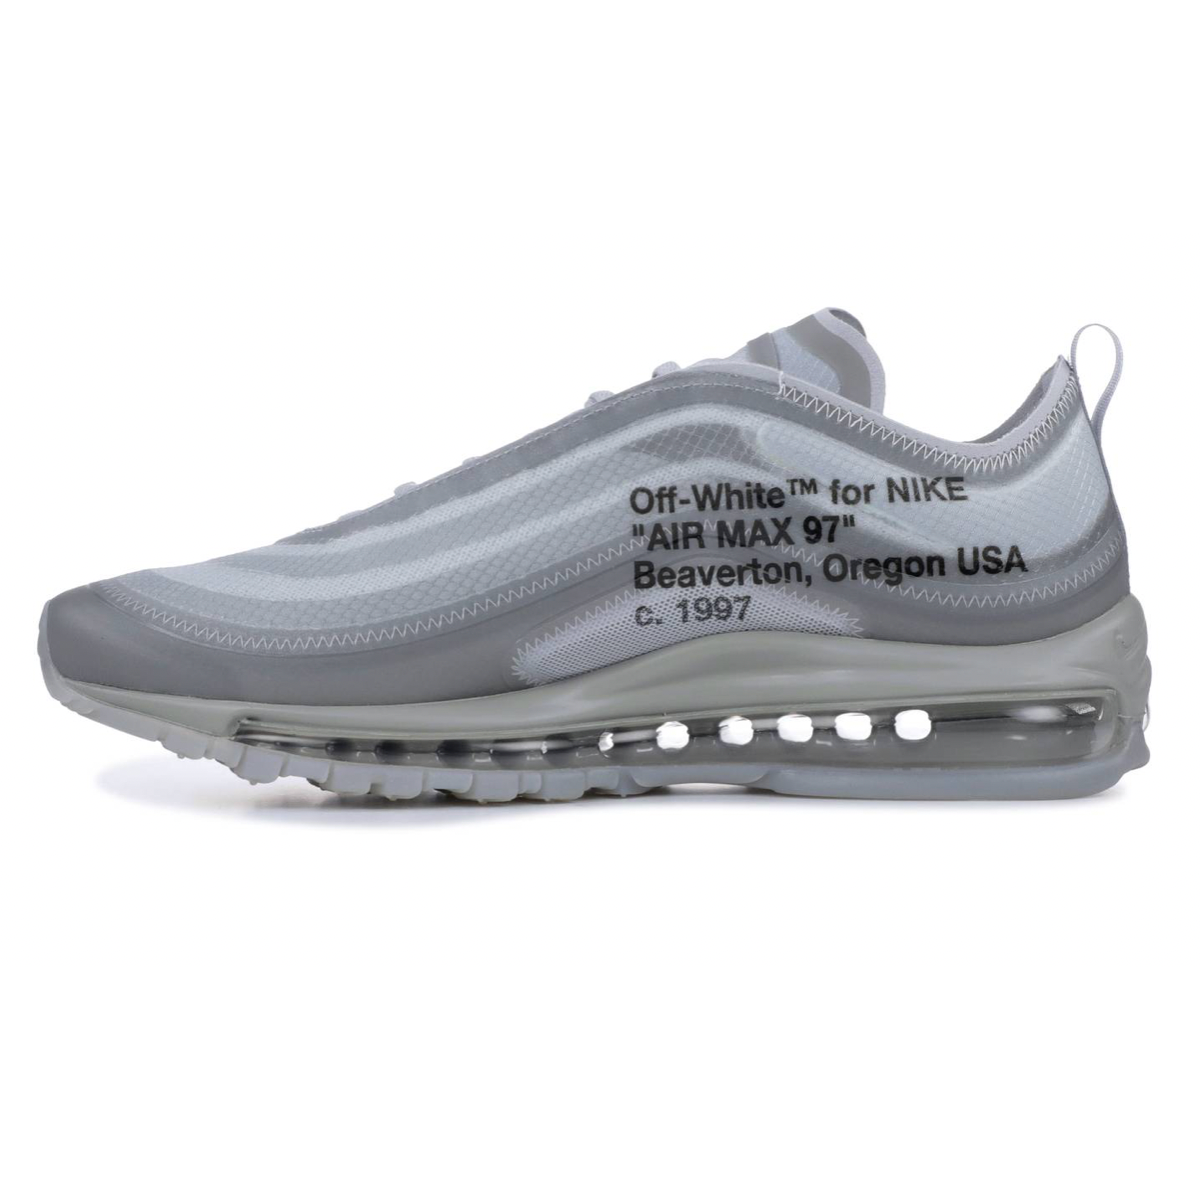 Nike Air Max 97 Off-White Menta by Nike from £800.00